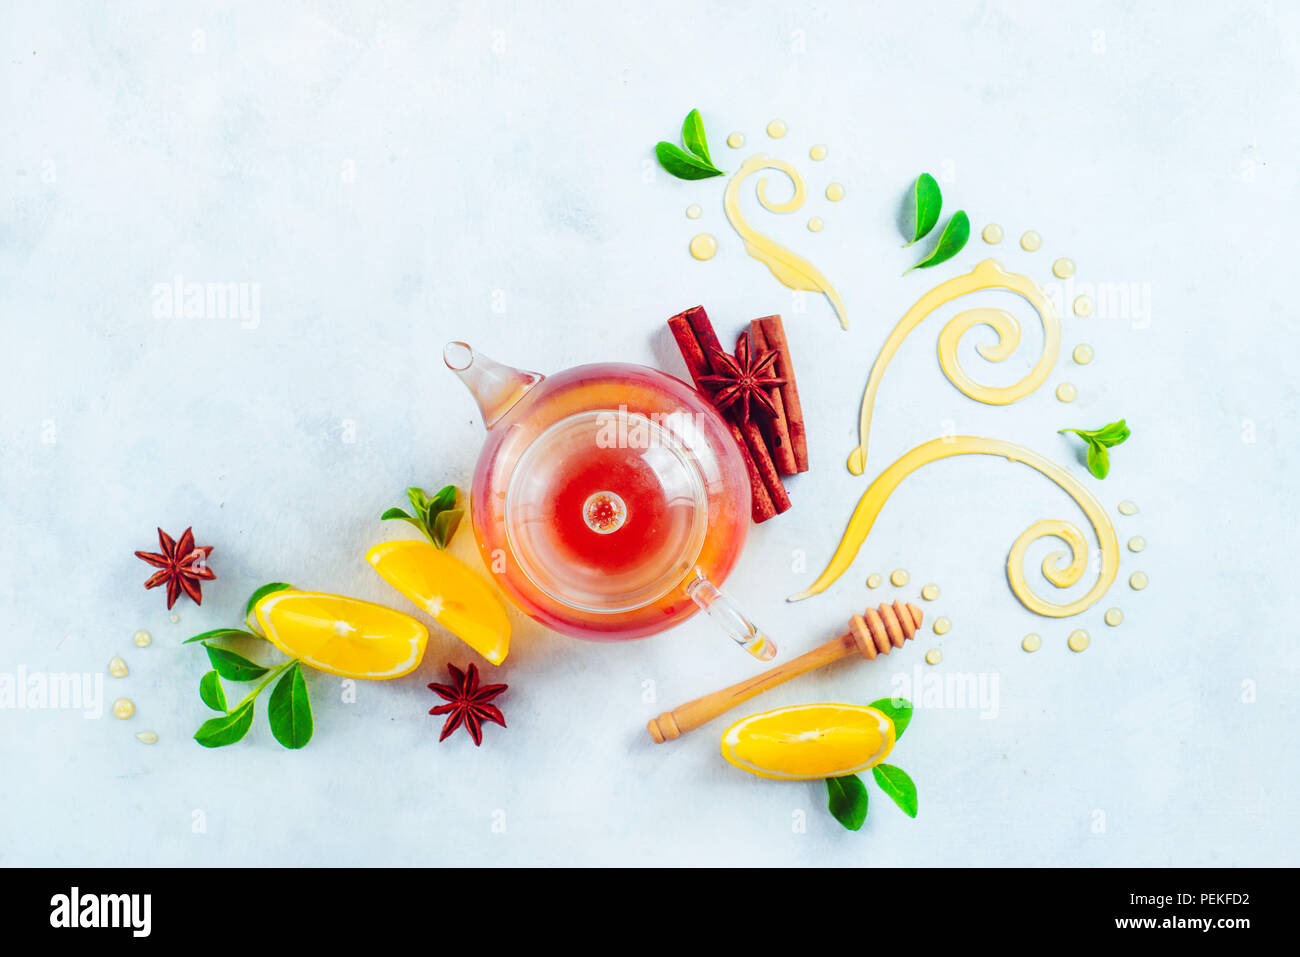 Honey and tea header. Glass teapot with decorative honey swirls, lemon slices and green leaves. Home remedies flat lay on a white background with copy Stock Photo